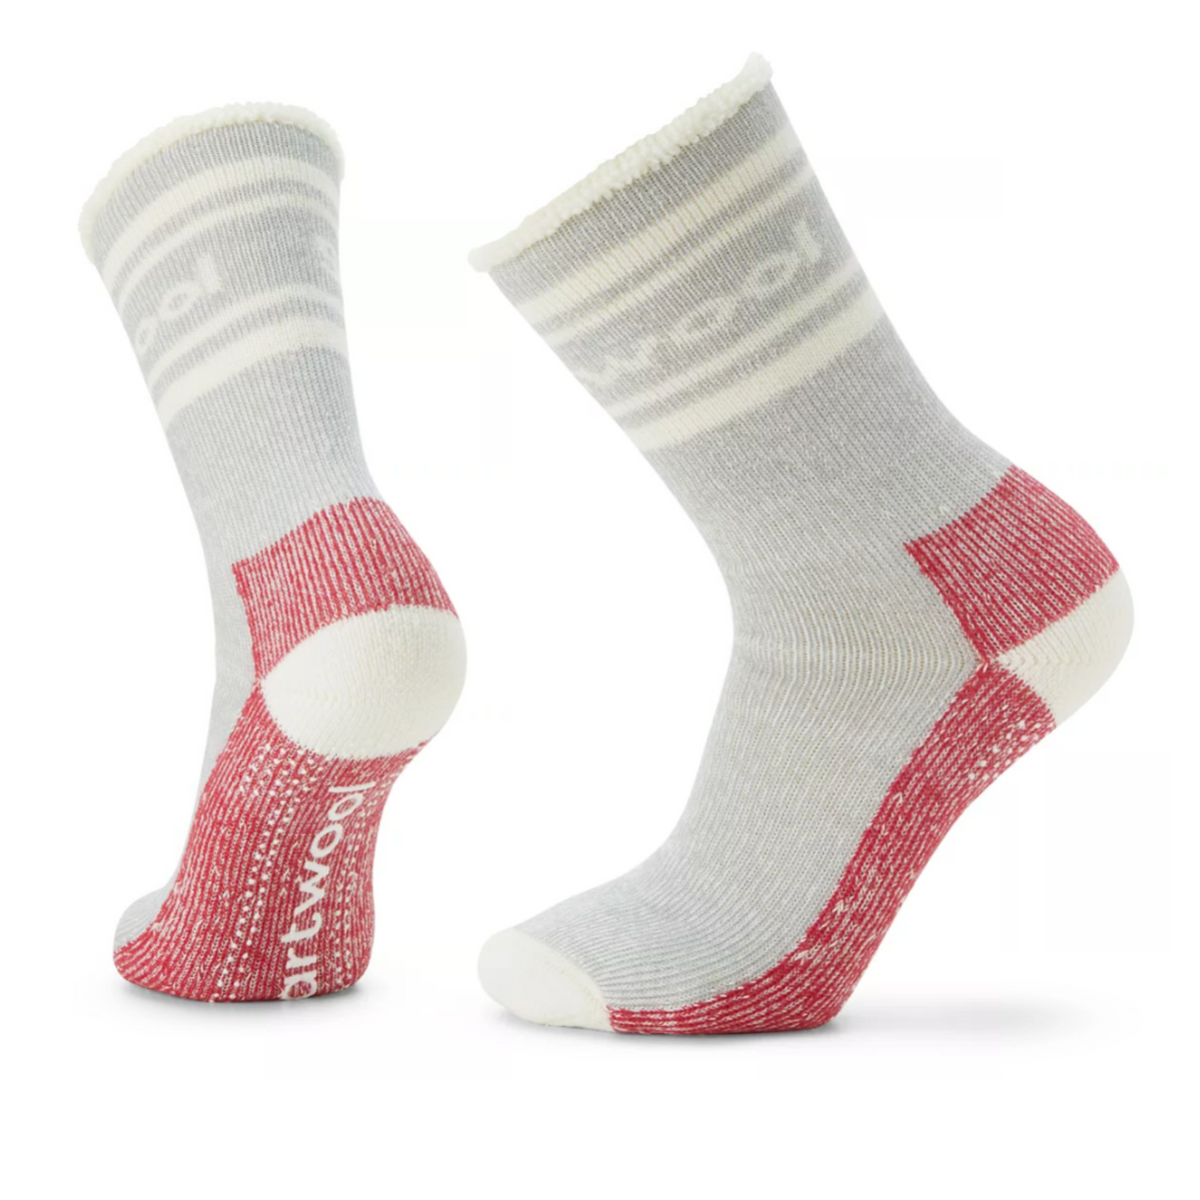 Medium Gray Smartwool Everyday Slipper Crew women&#39;s and men&#39;s sock featuring gray sock with white cuff, toe, and heel and red sole. &quot;Smartwool&quot; written across top of sock below cuff. Socks shown on display feet. 